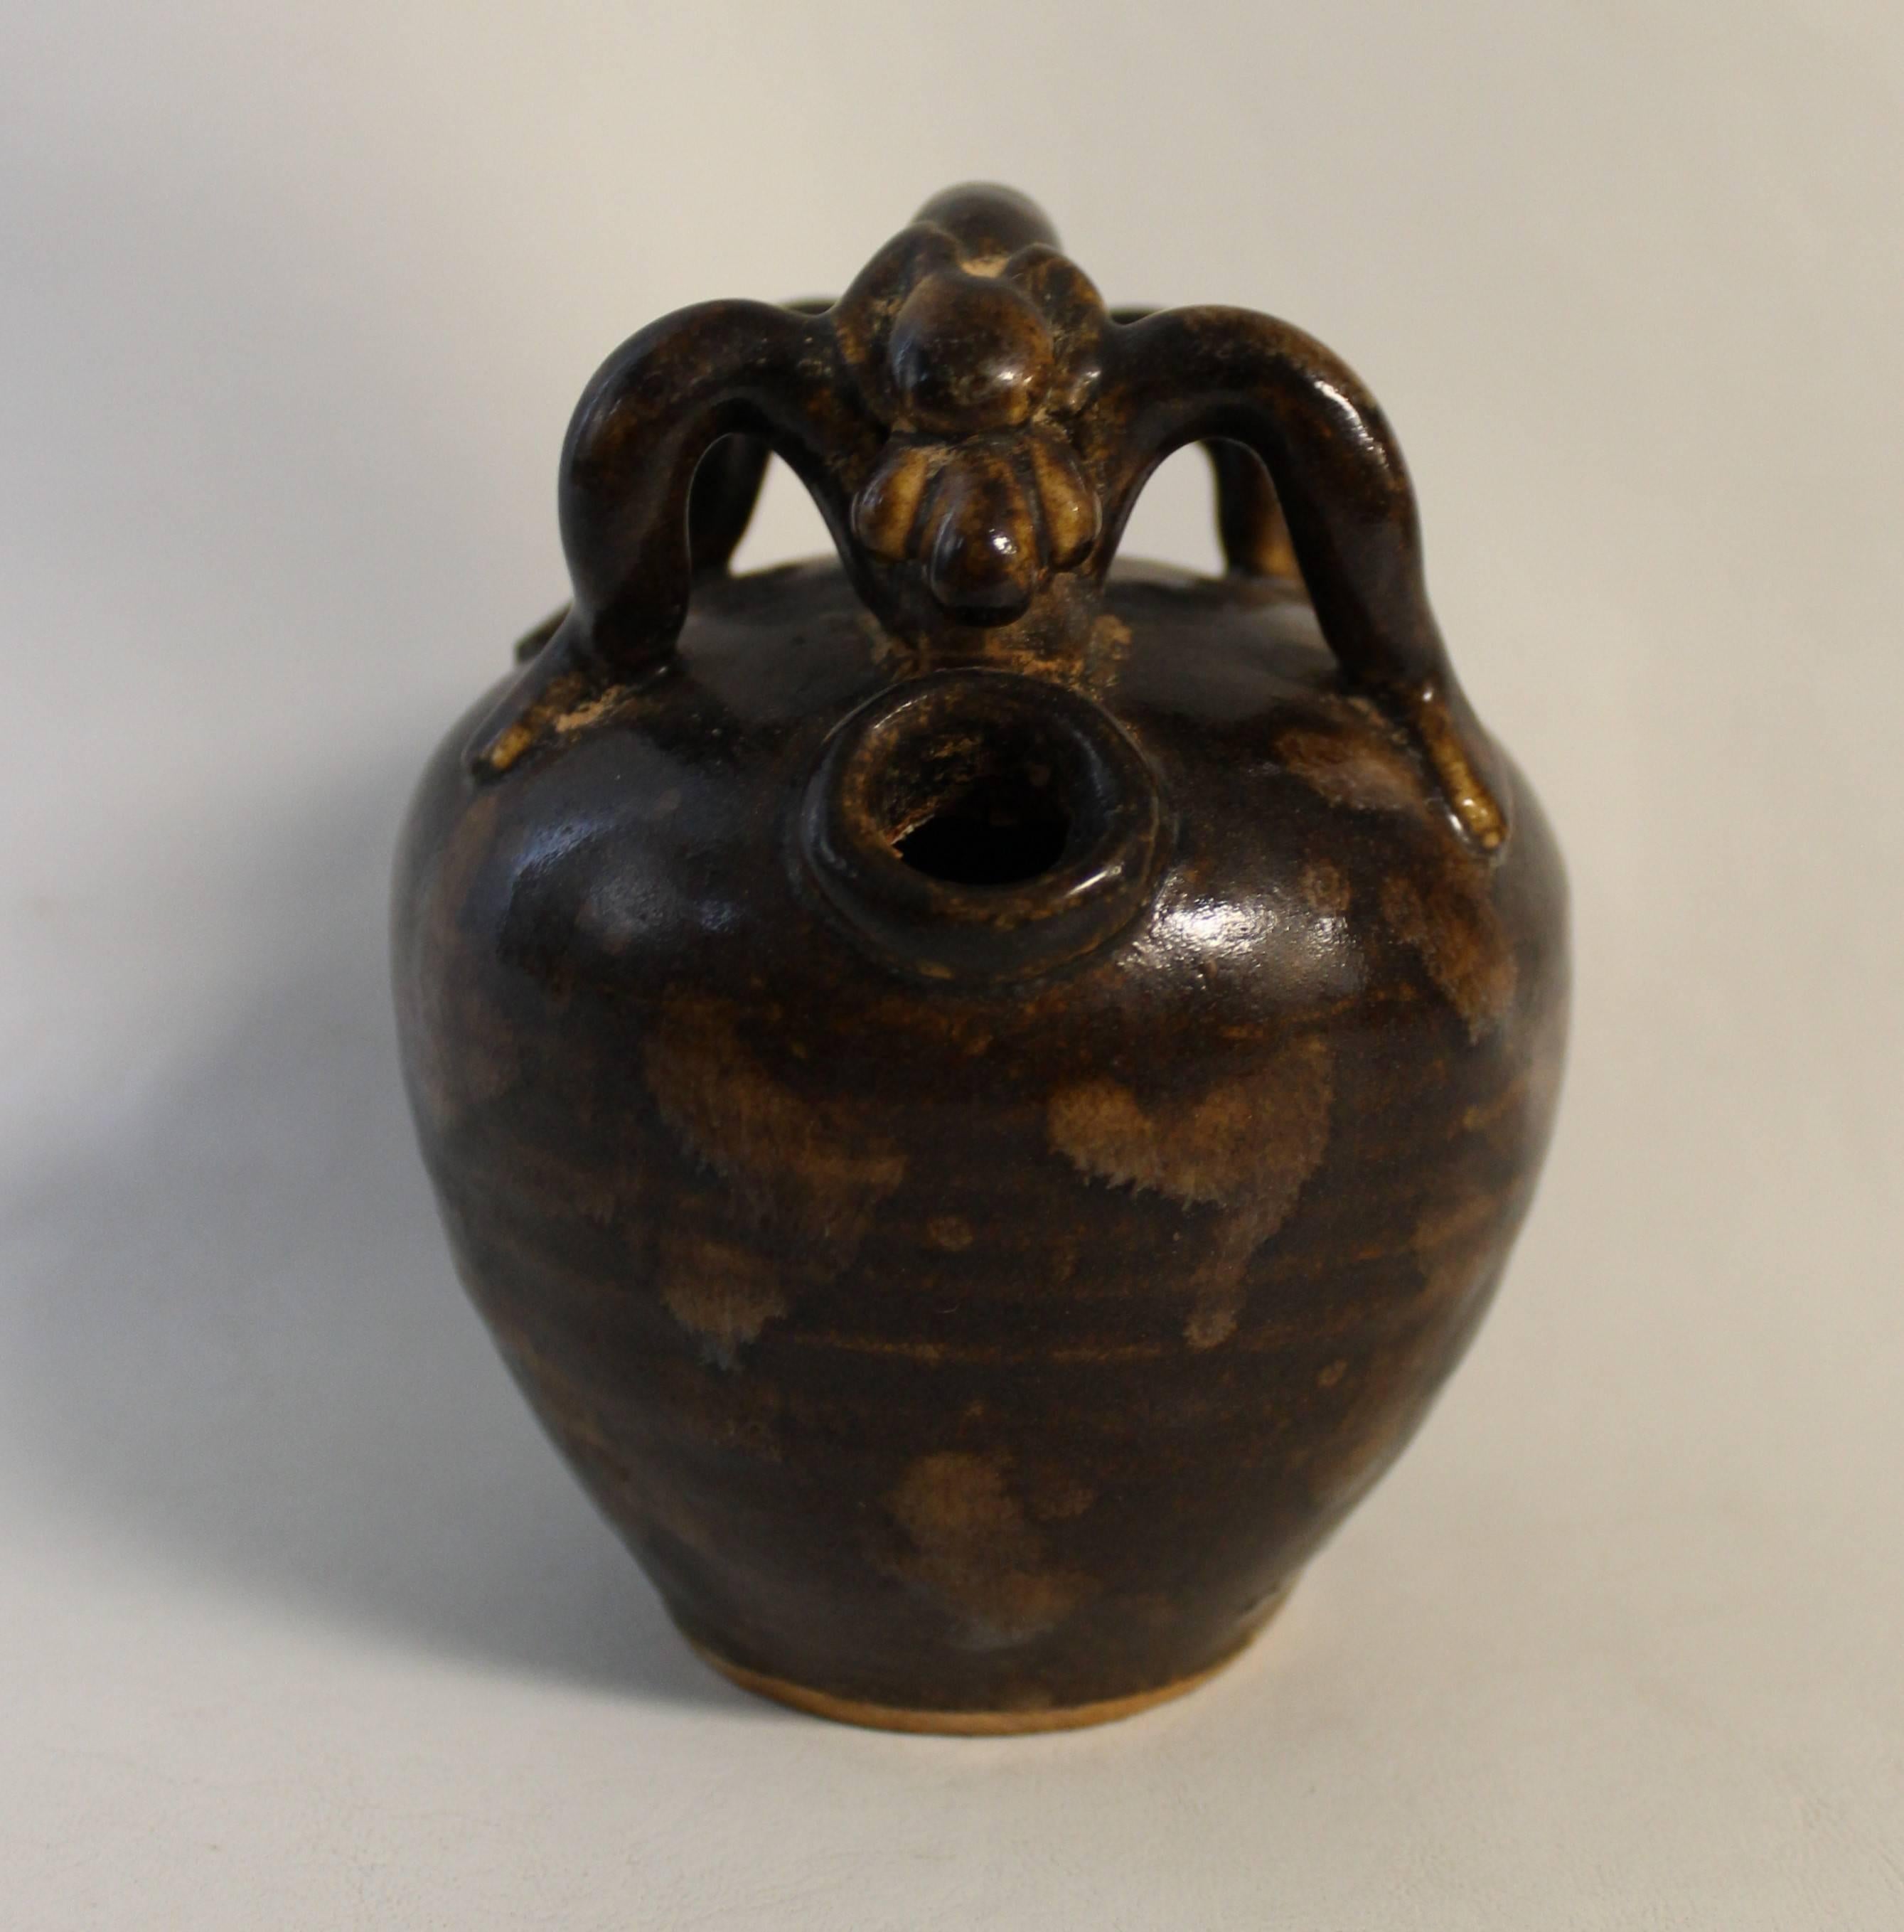 Early 20th century Chinese song style wine ewer or jar in tortoise shell glaze. It features an ovoid body and side opening with young mouth. The top is surmounted by a lizard-form qilong dragon on all fours guarding the mouth and finished in mottled